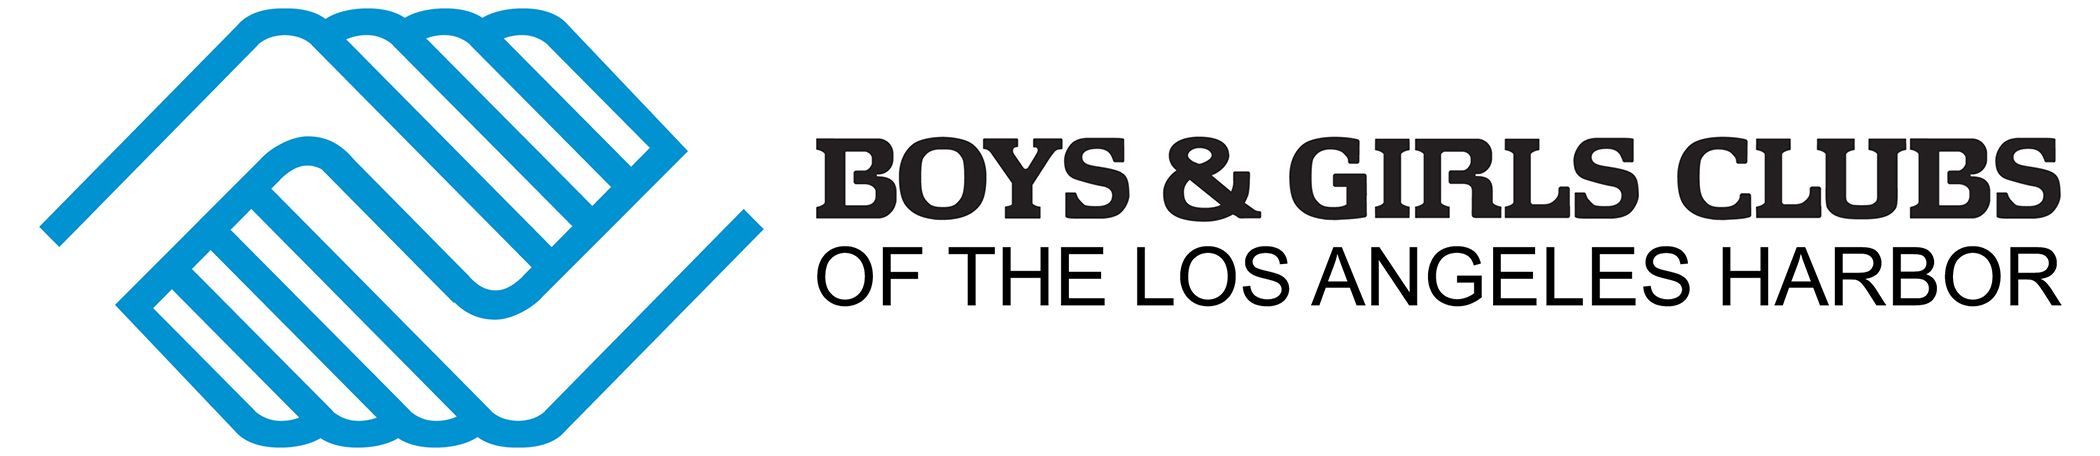 boys and girls club of the los angeles harbor logo